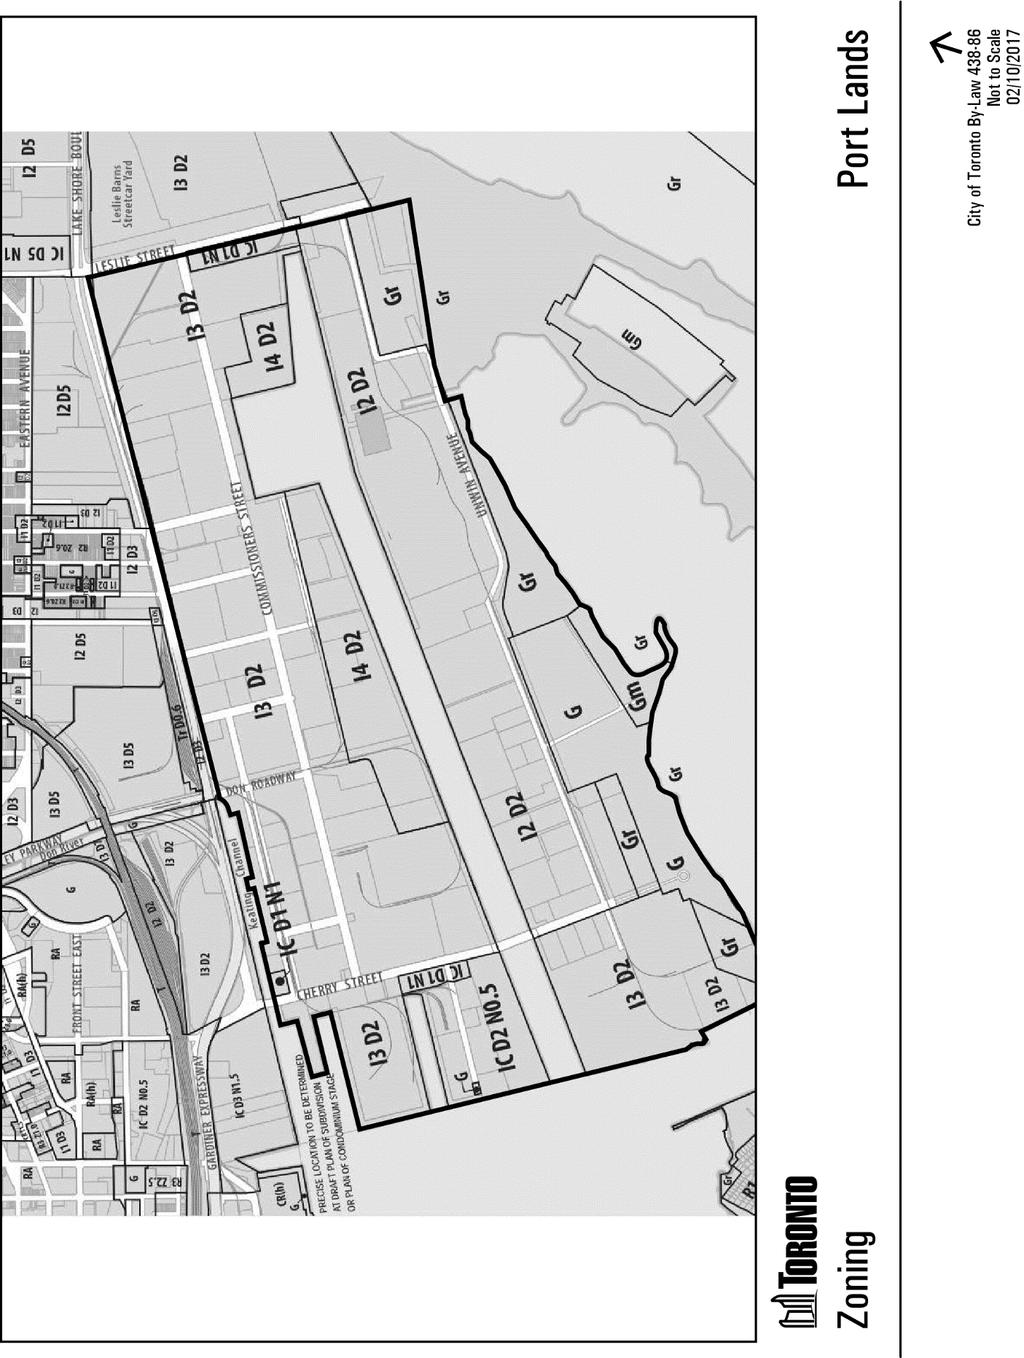 Attachment 3: Zoning By-law 438-86 Staff report for